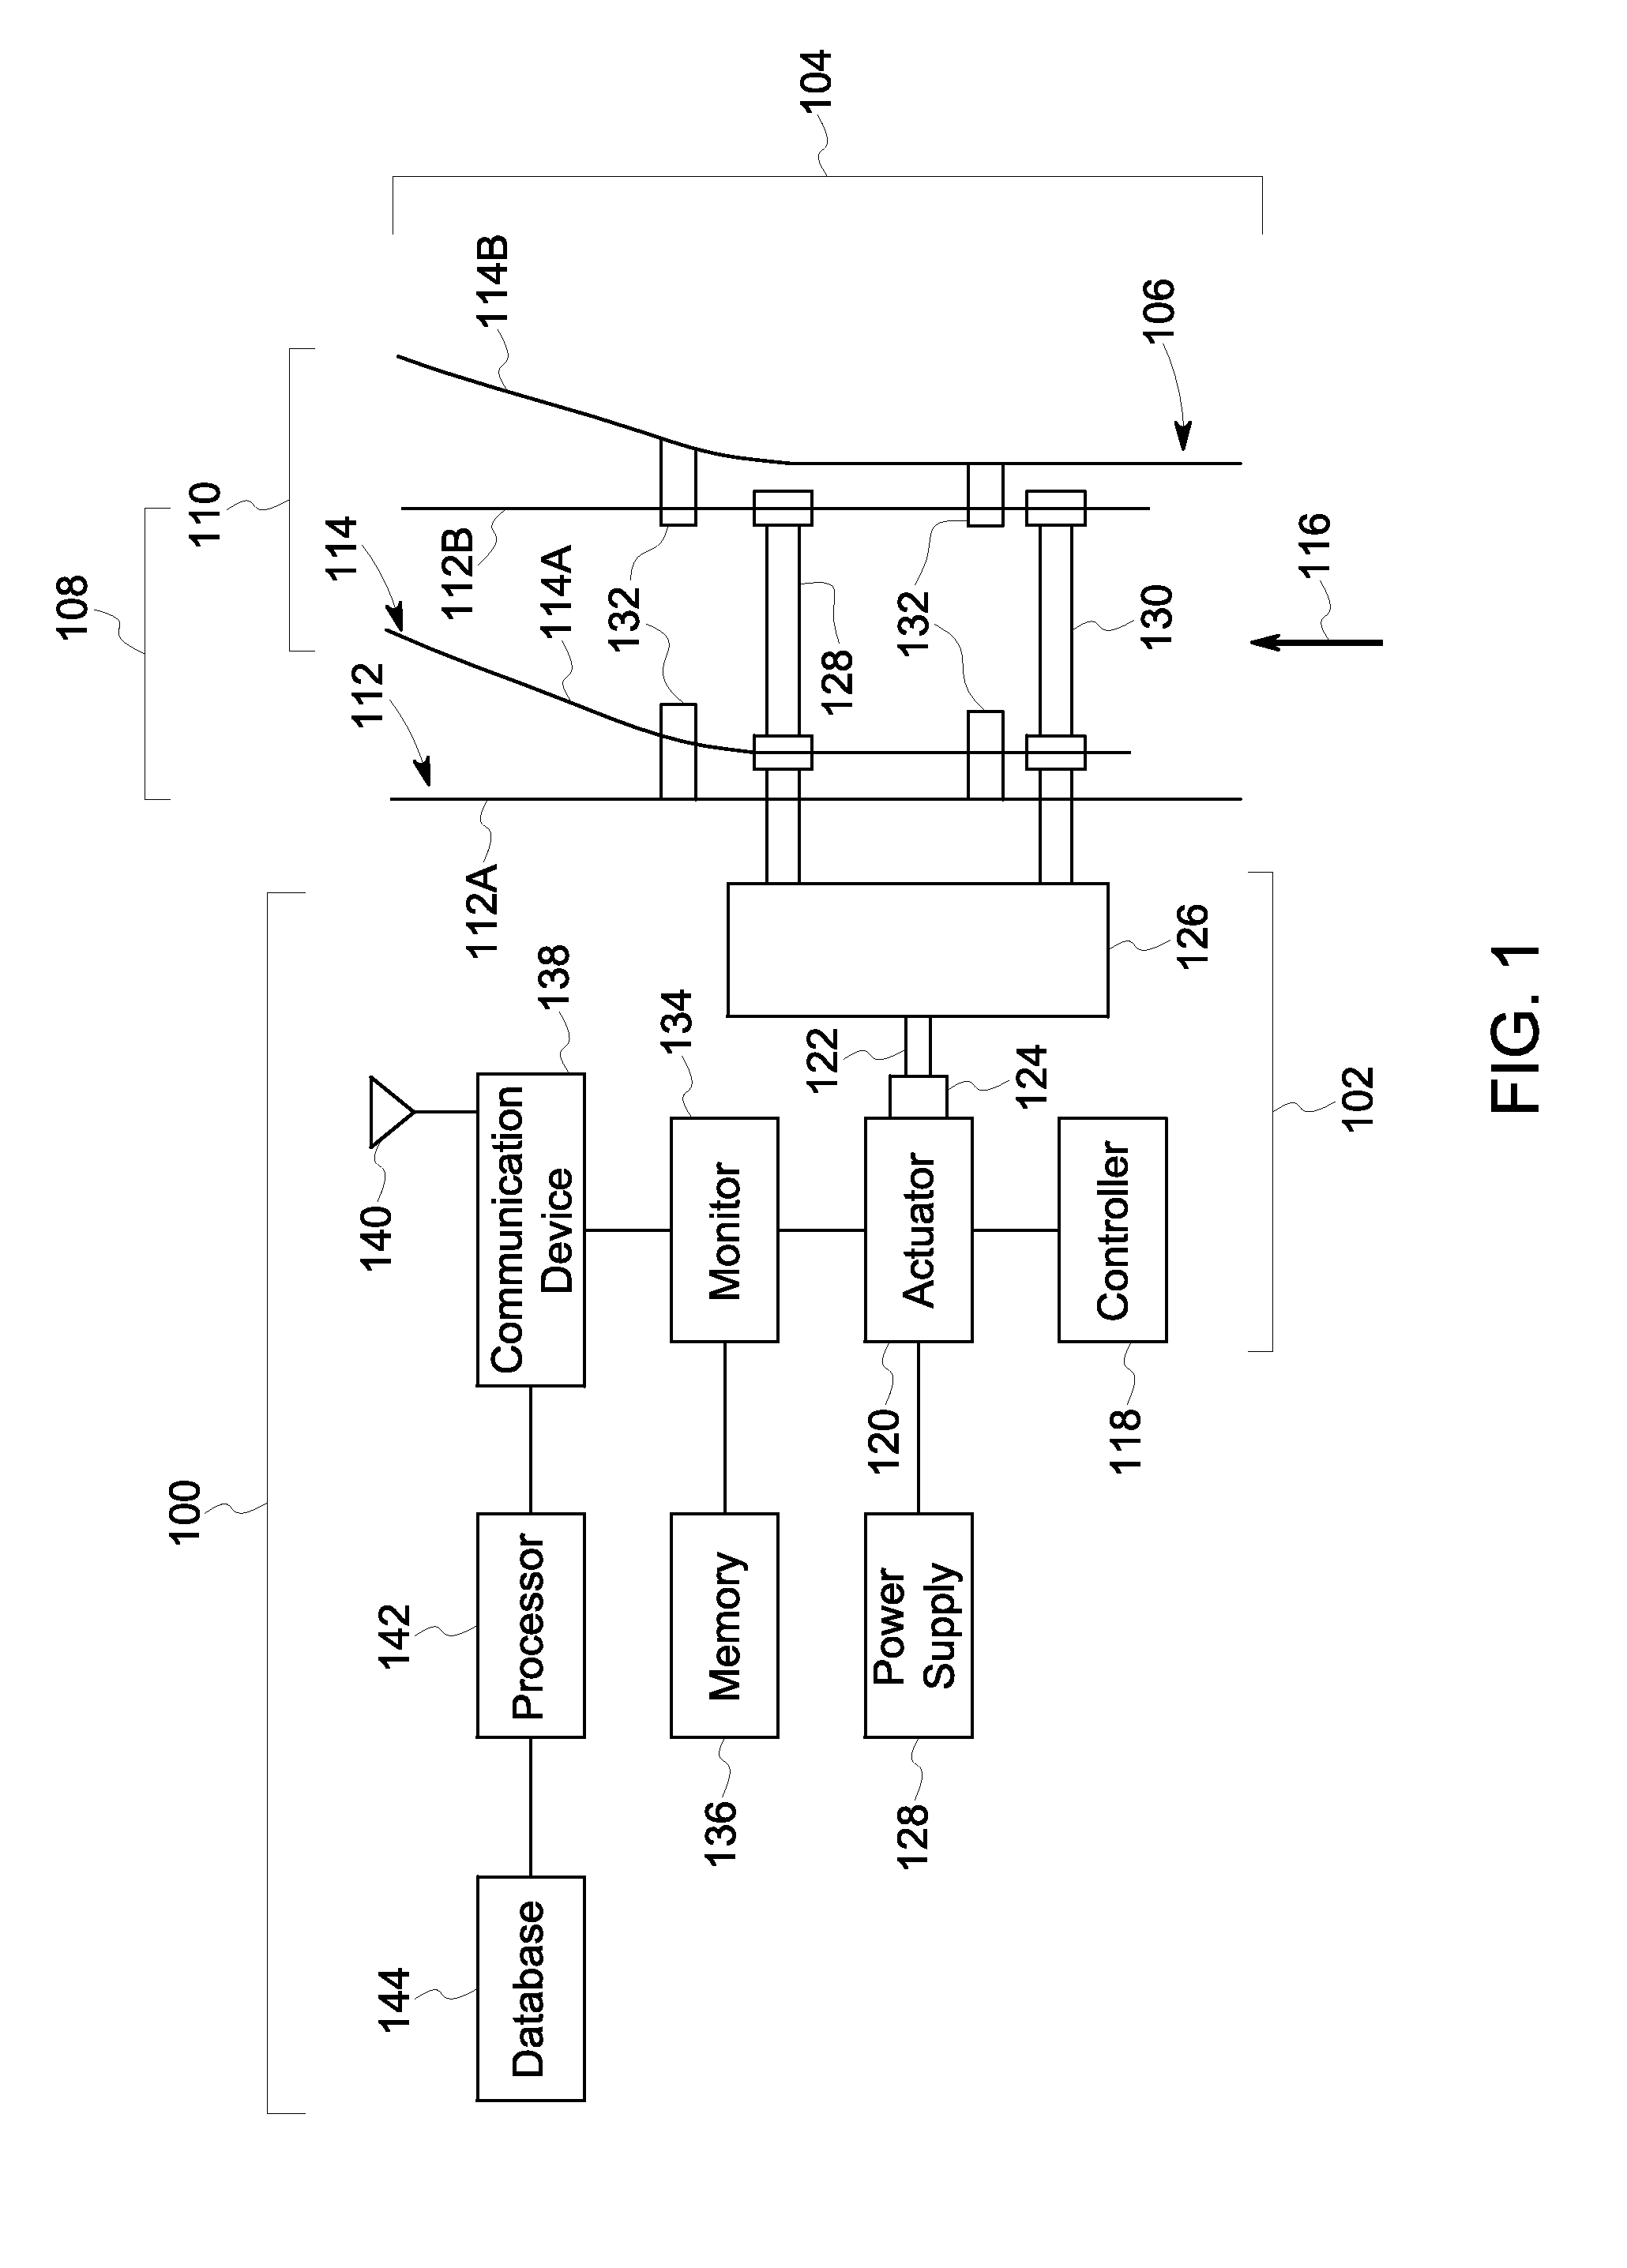 Points machine monitoring system and method